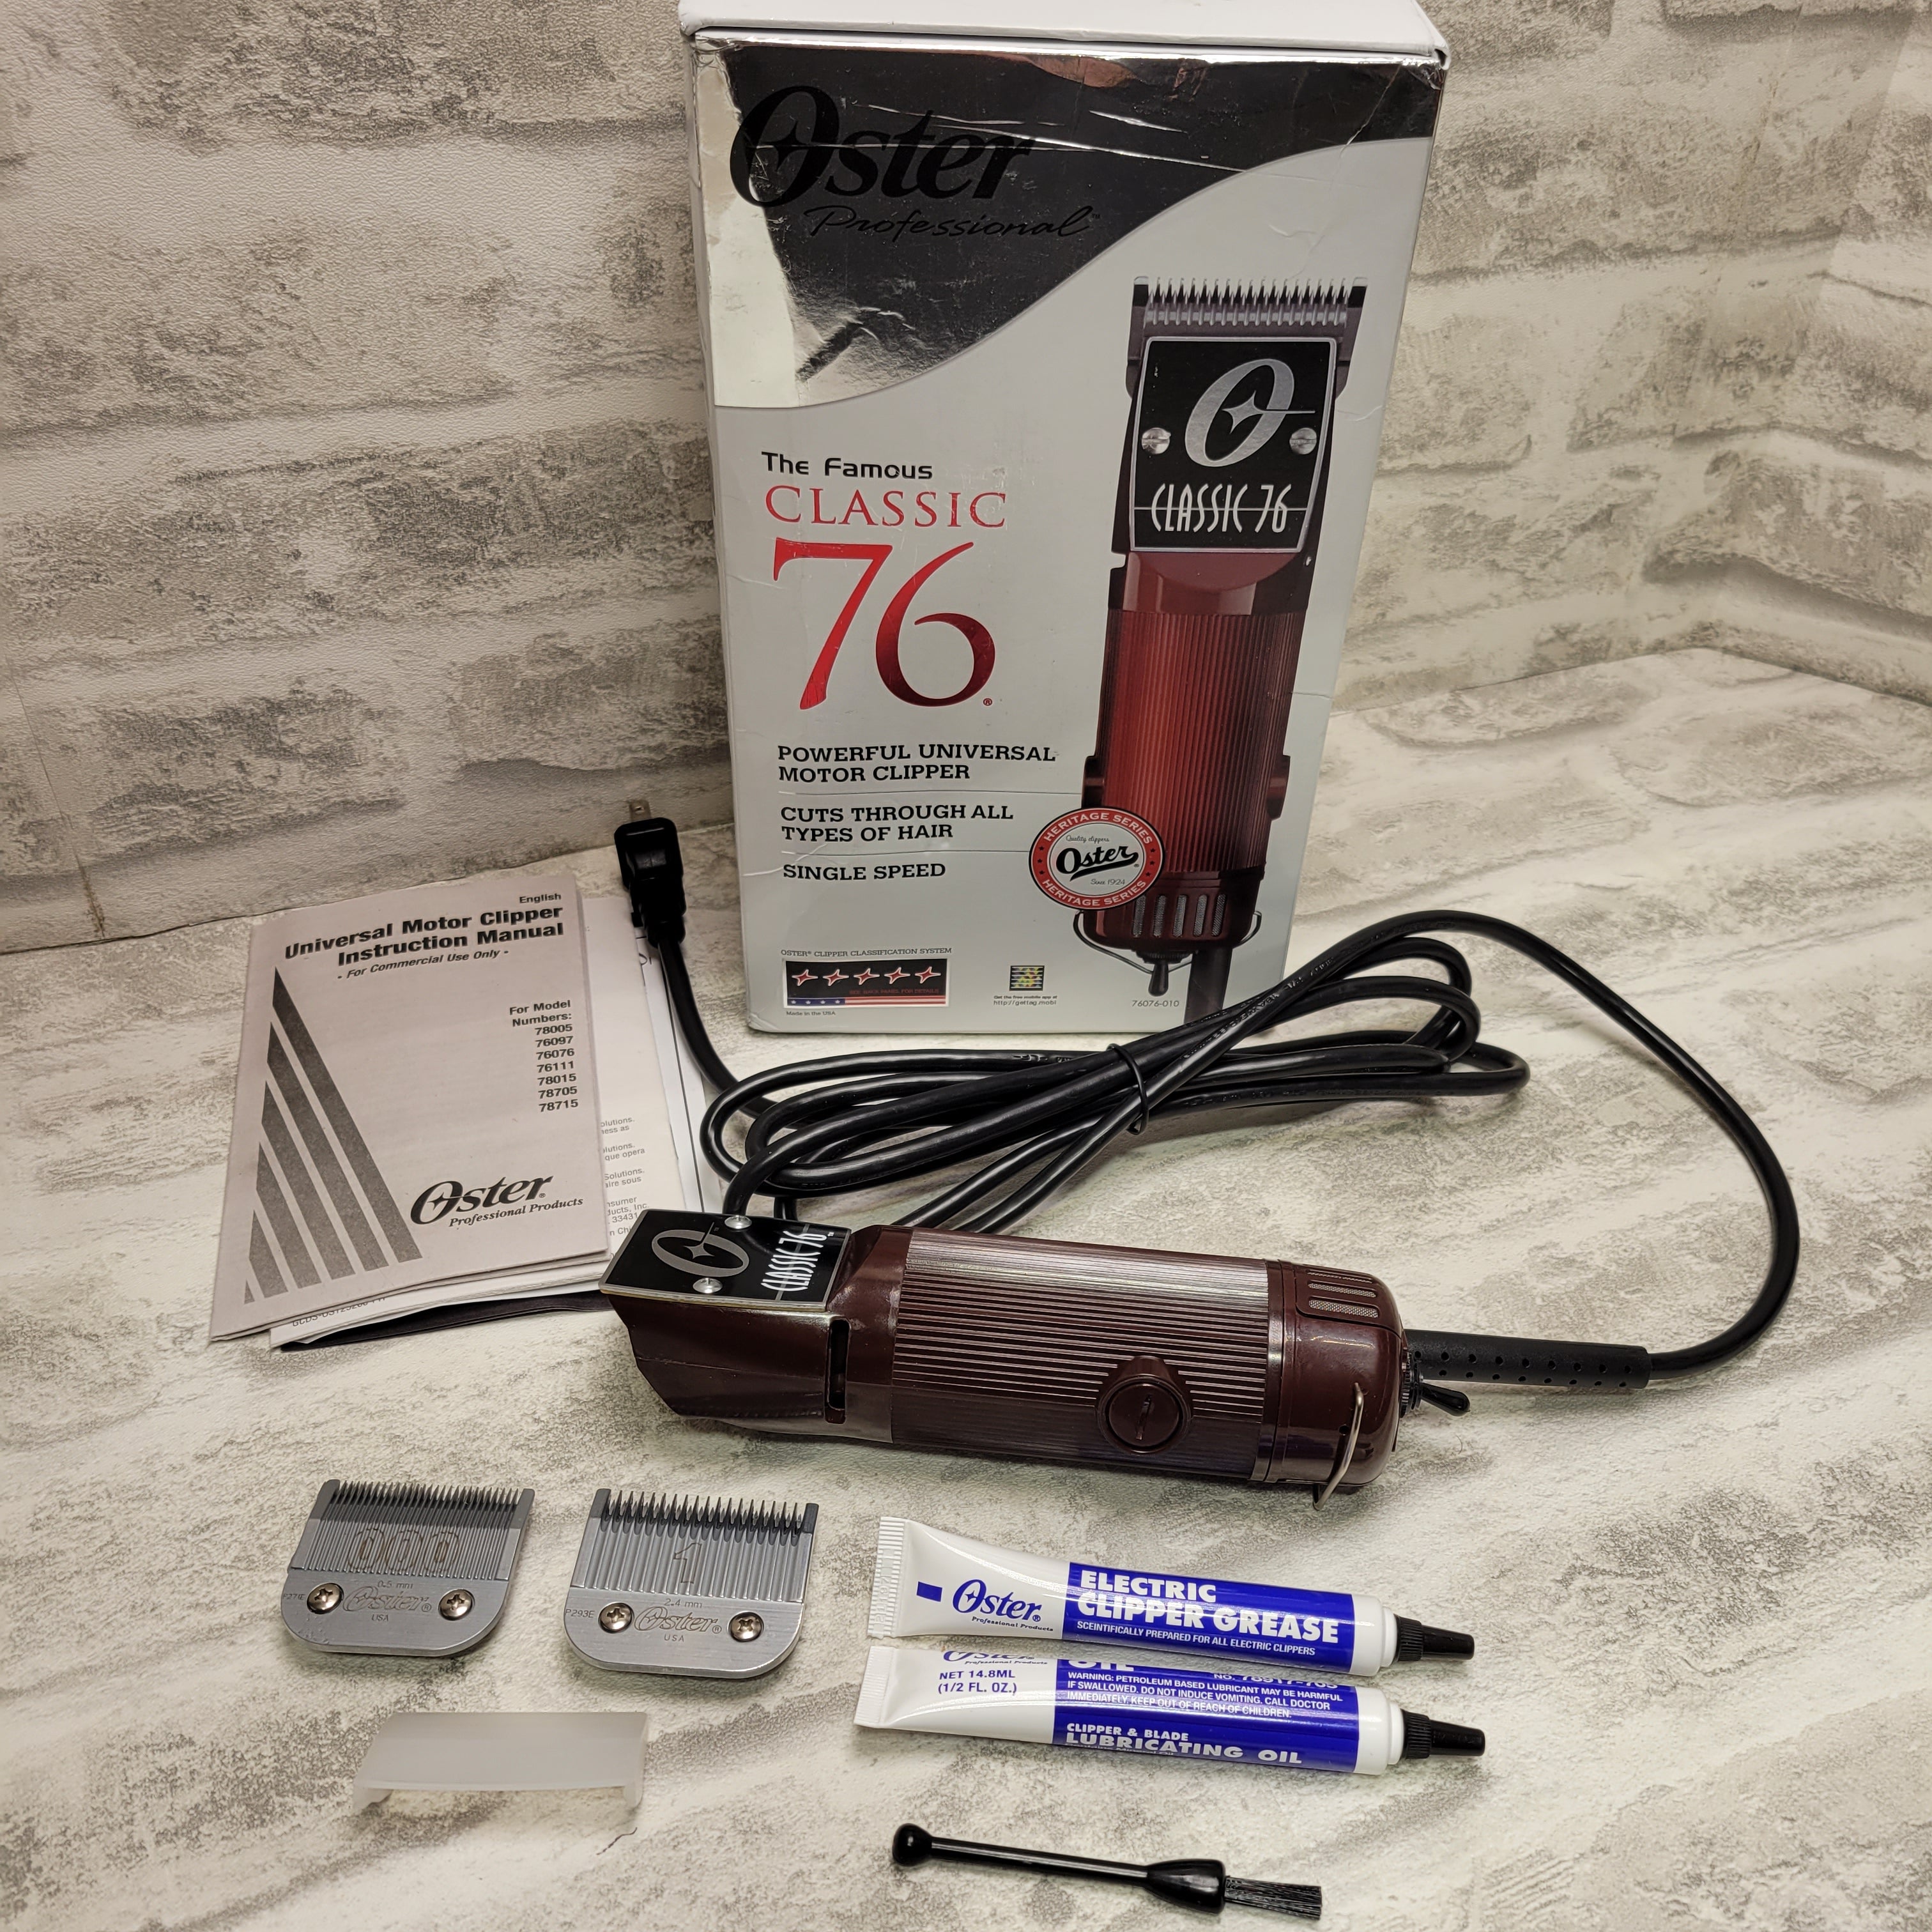 Oster Classic 76 Professional Hair Clippers (7592669610222)